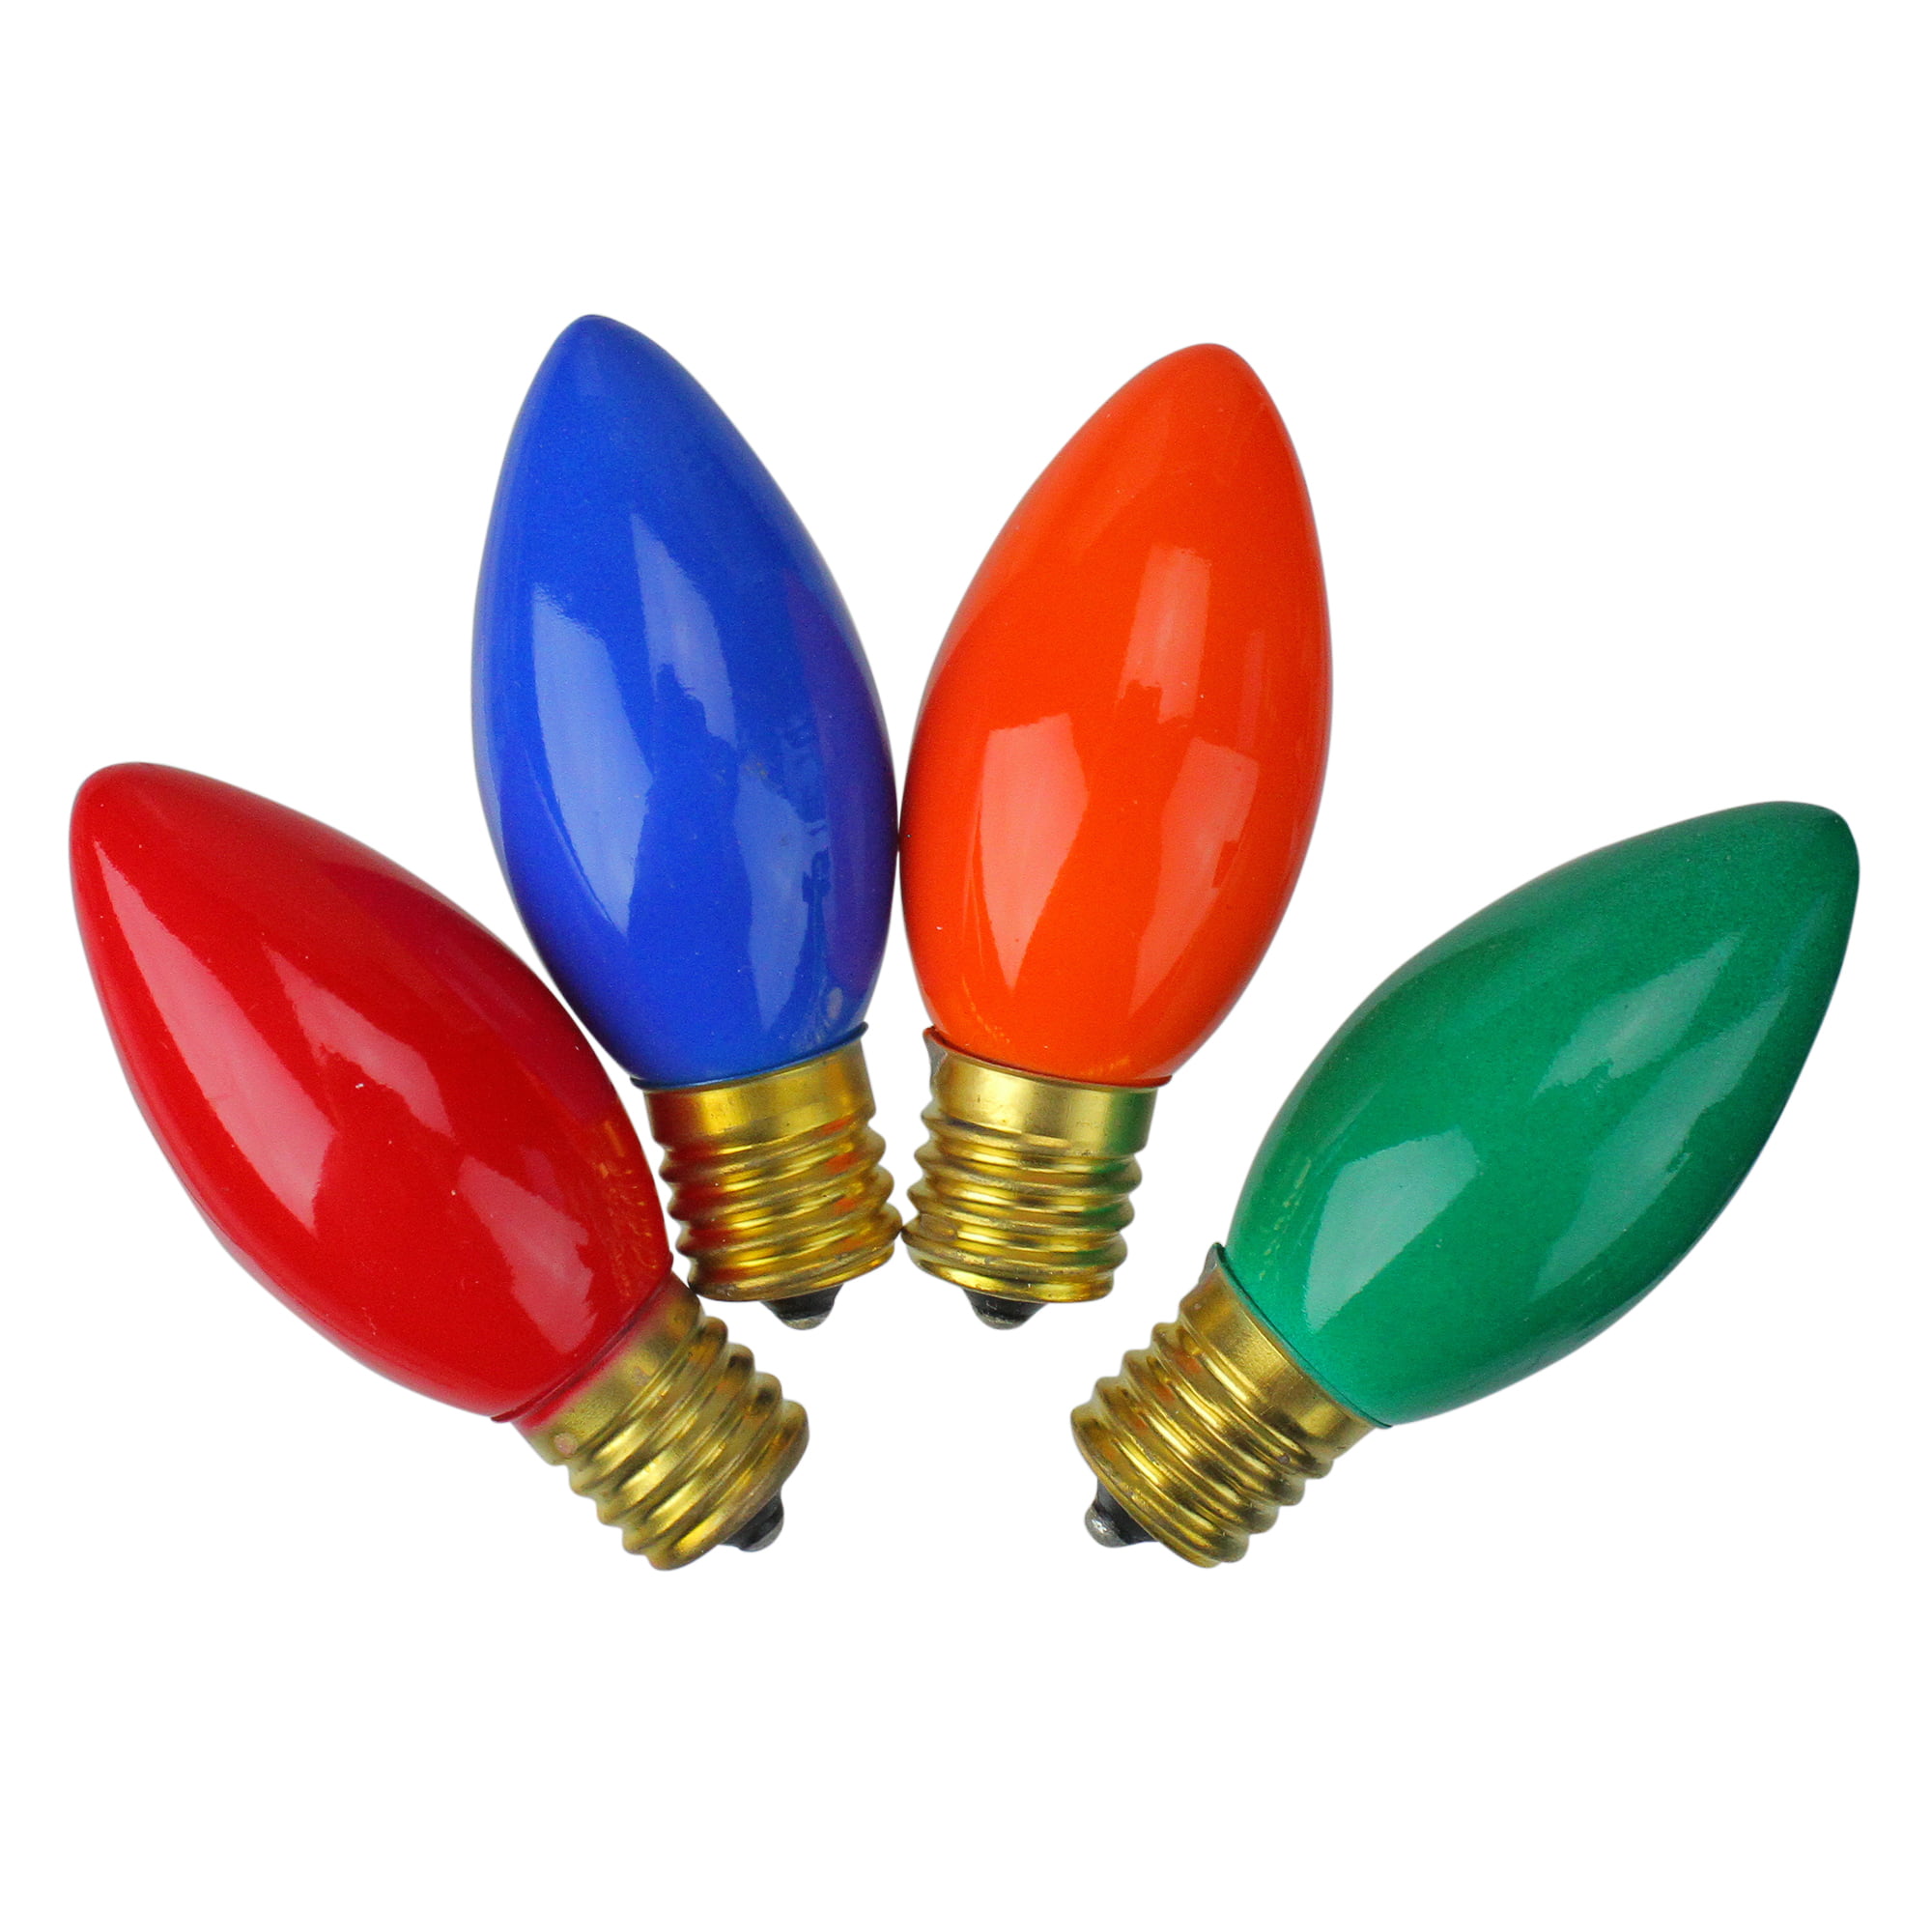 6X Replacement Christmas Light Bulbs 12V 3W E12 Multi Coloured Small Screw In...